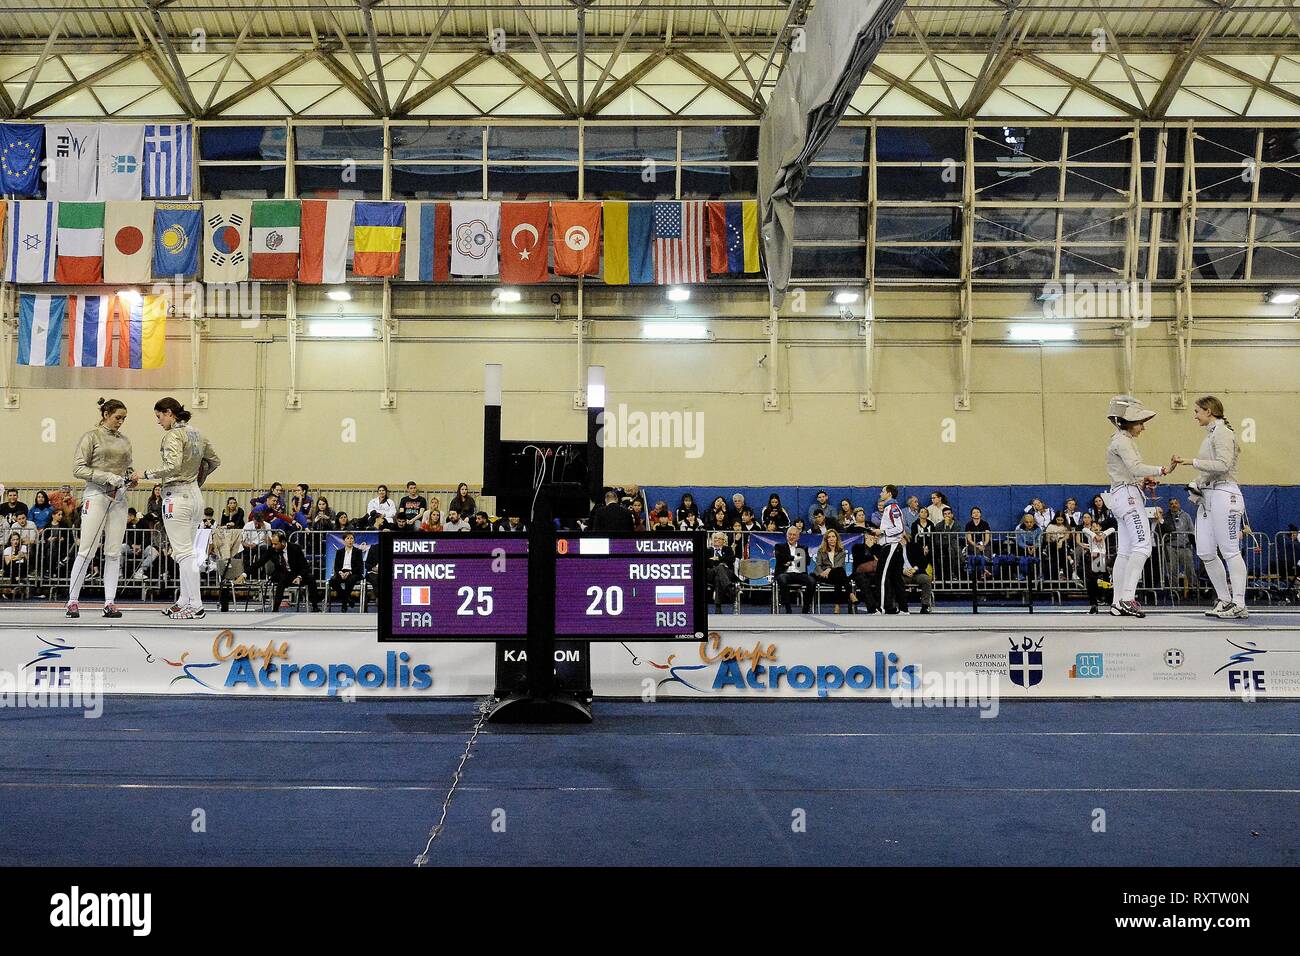 Athletes of Women's fencing teams of France and Russia are seen in action during the teams final of International fencing tournament, Acropolis Coupe 2019. Stock Photo